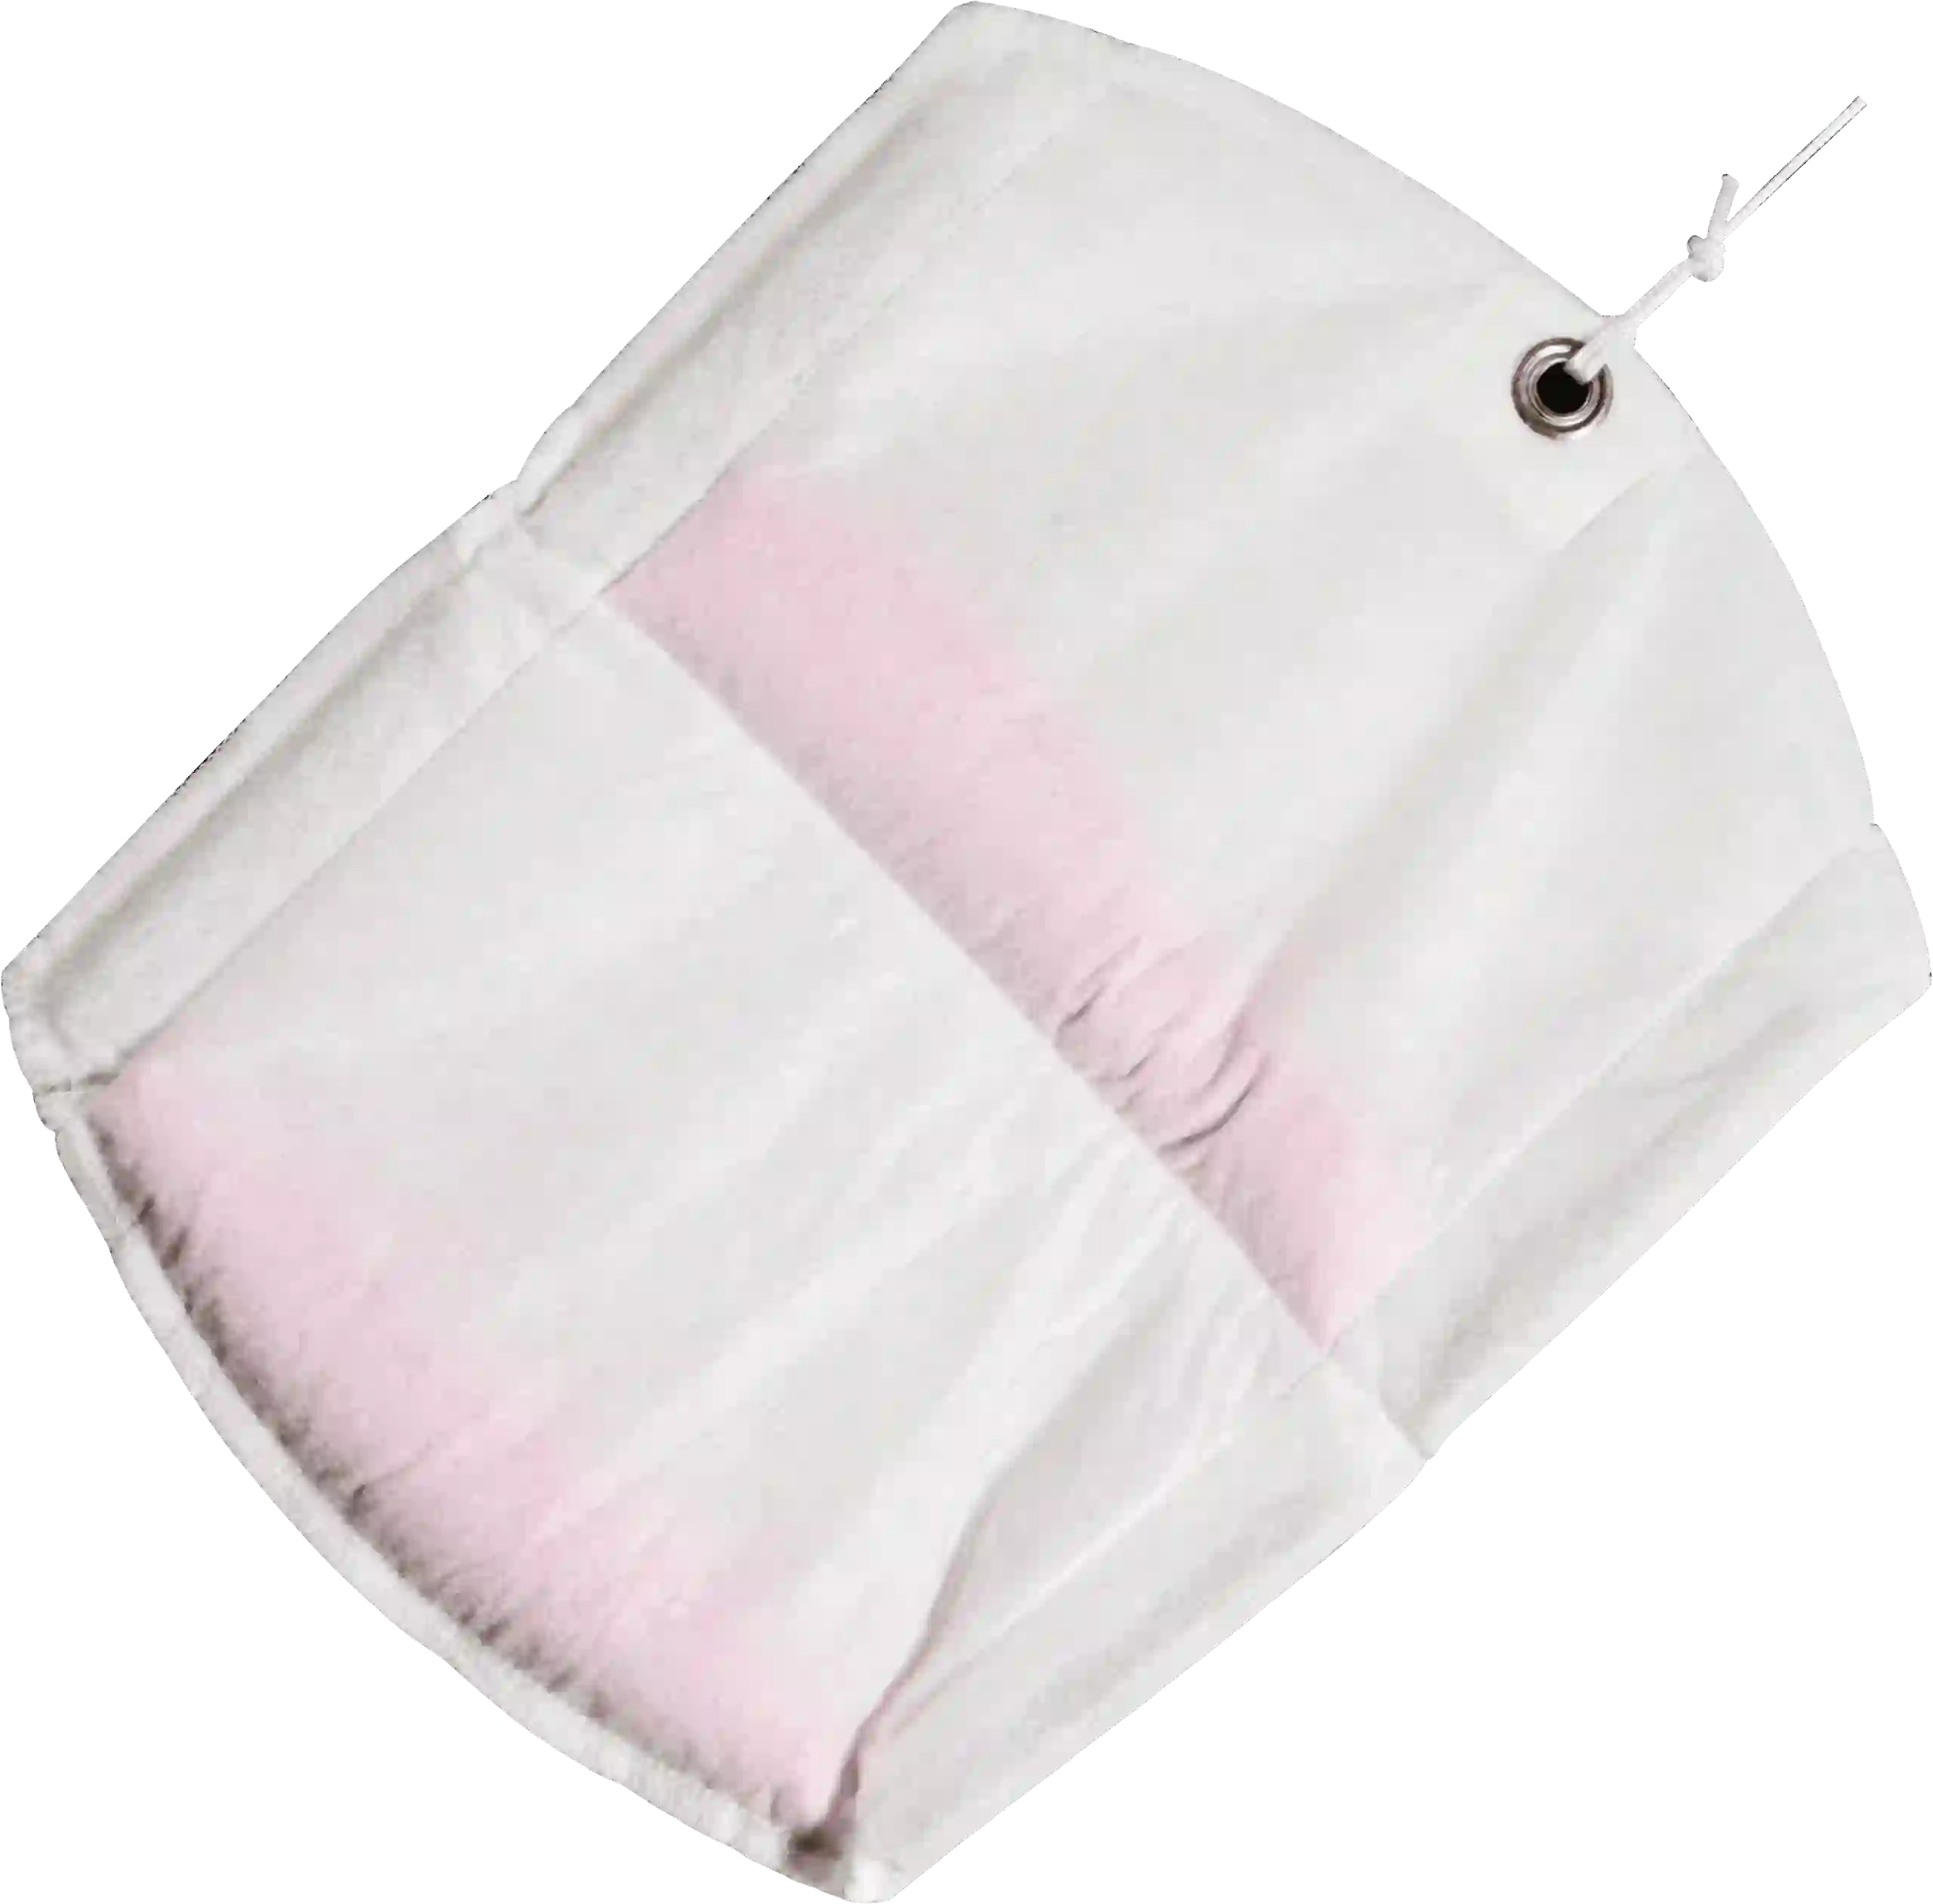 White canvas bag with a pink interior, featuring a grommet in the top right corner and a drawstring attached, used for liquid absorption or filtration.